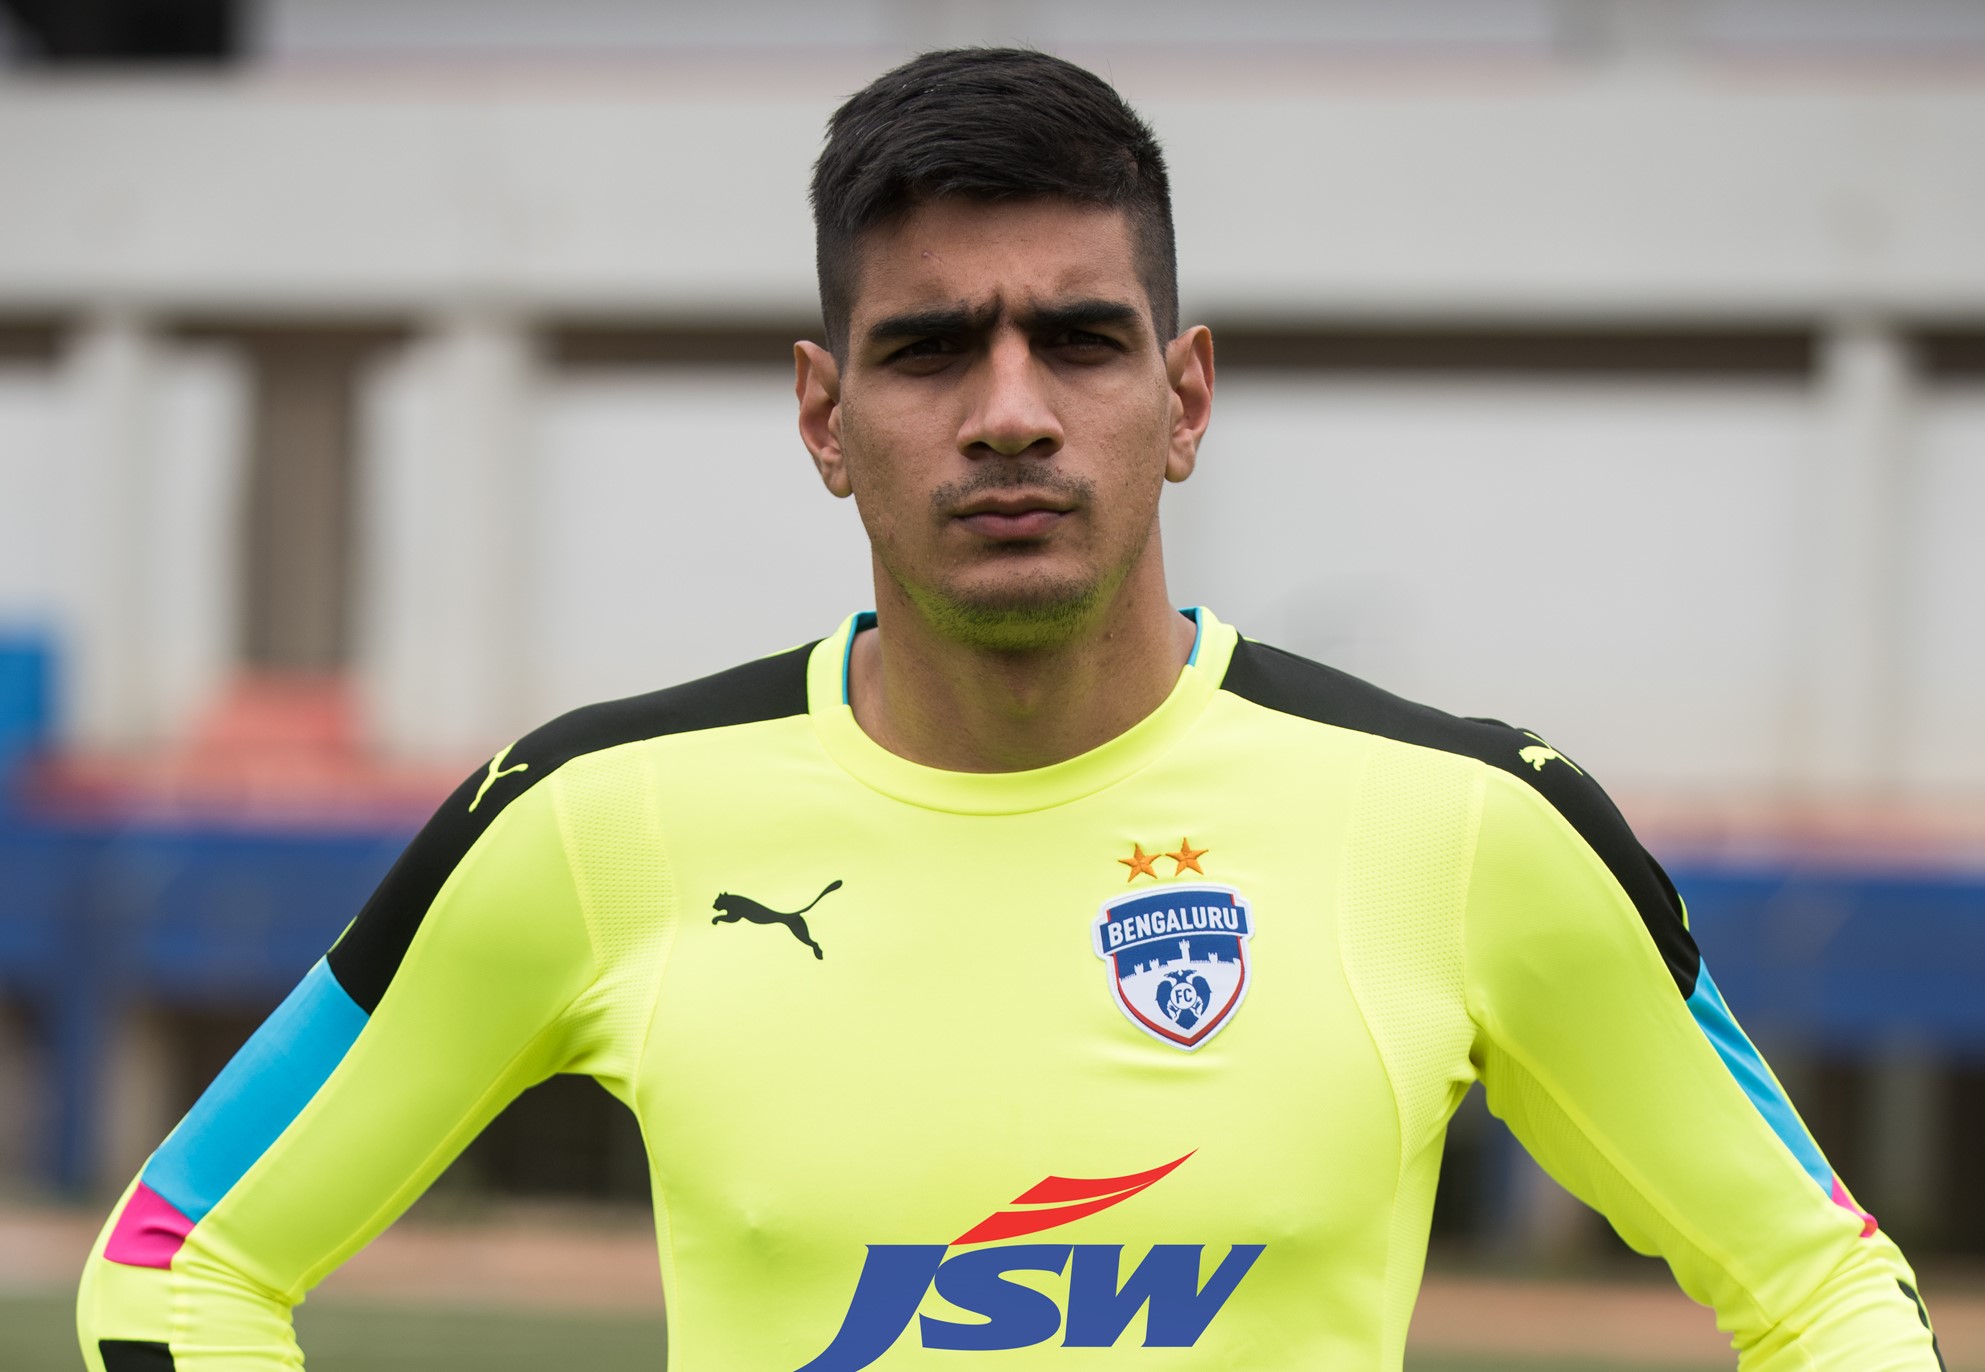 Gurpreet Singh Sandhu Age, Salary, Net worth, Current Teams, Career, Height, and much more